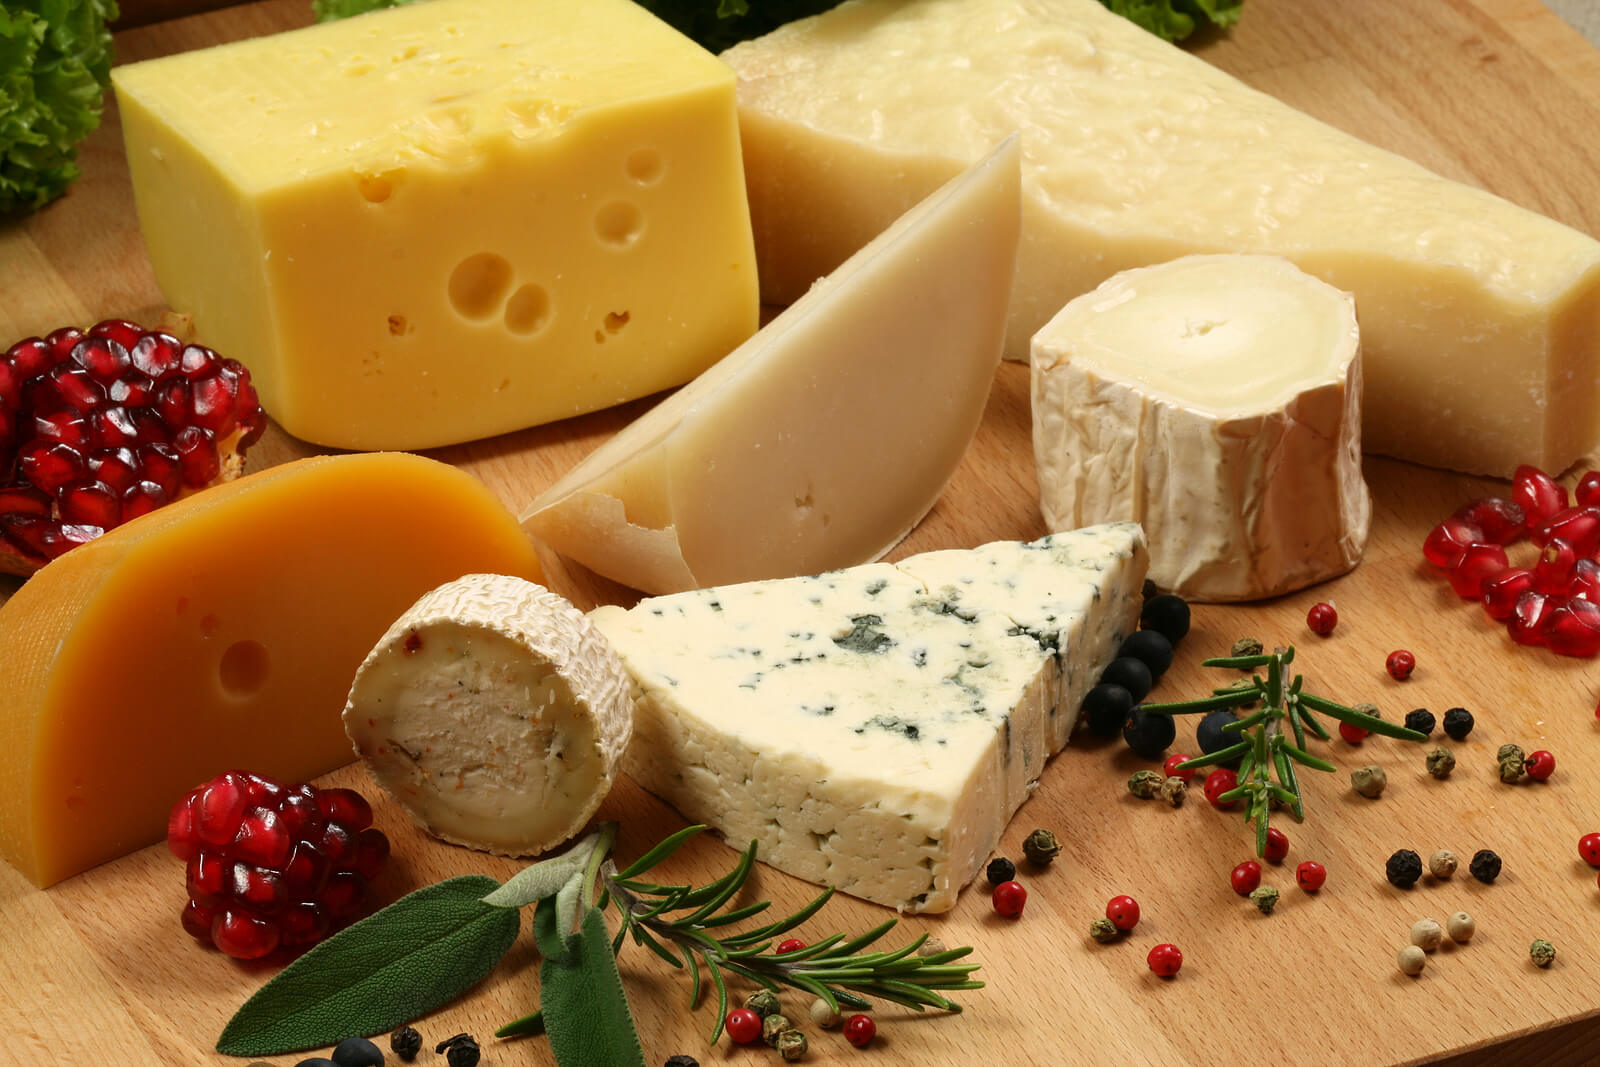 Some of the cheese you should avoid during pregnancy.